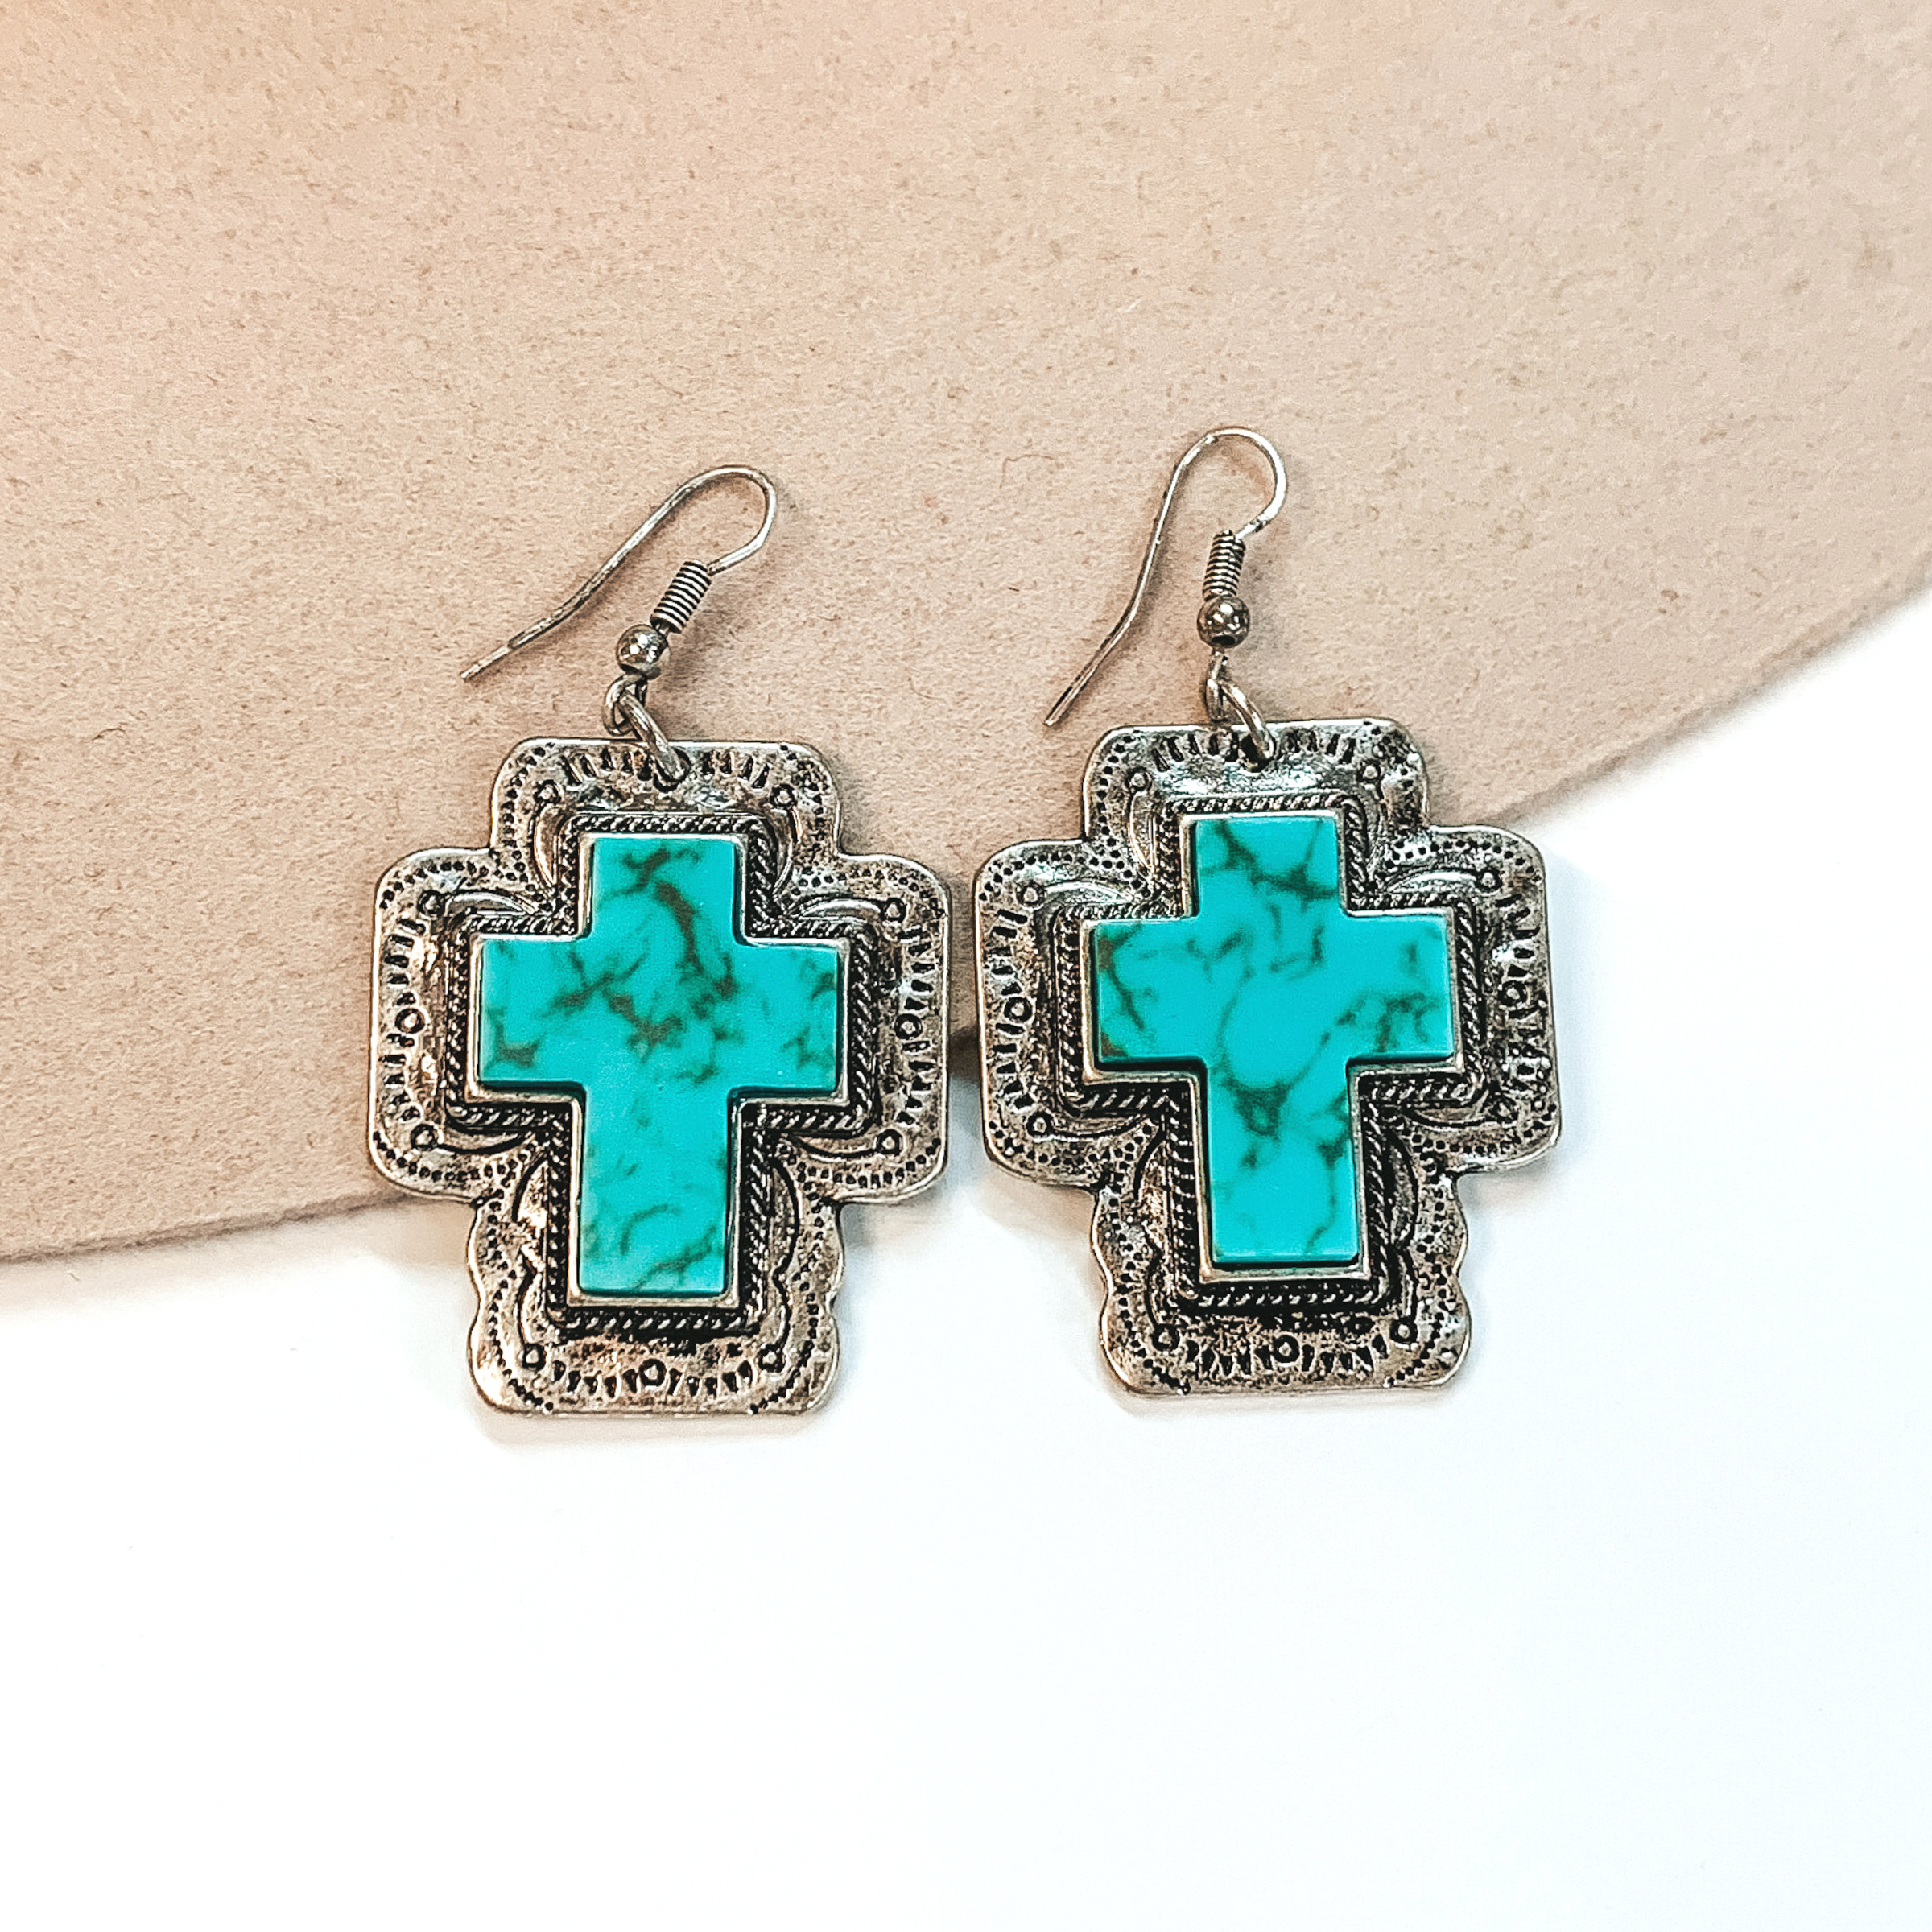 Fish hook earrings with silver cross pendant with engraving detailing. In the center of the pendant, there is a turquoise cross stone. These earrings are pictured on a white and beige background. 